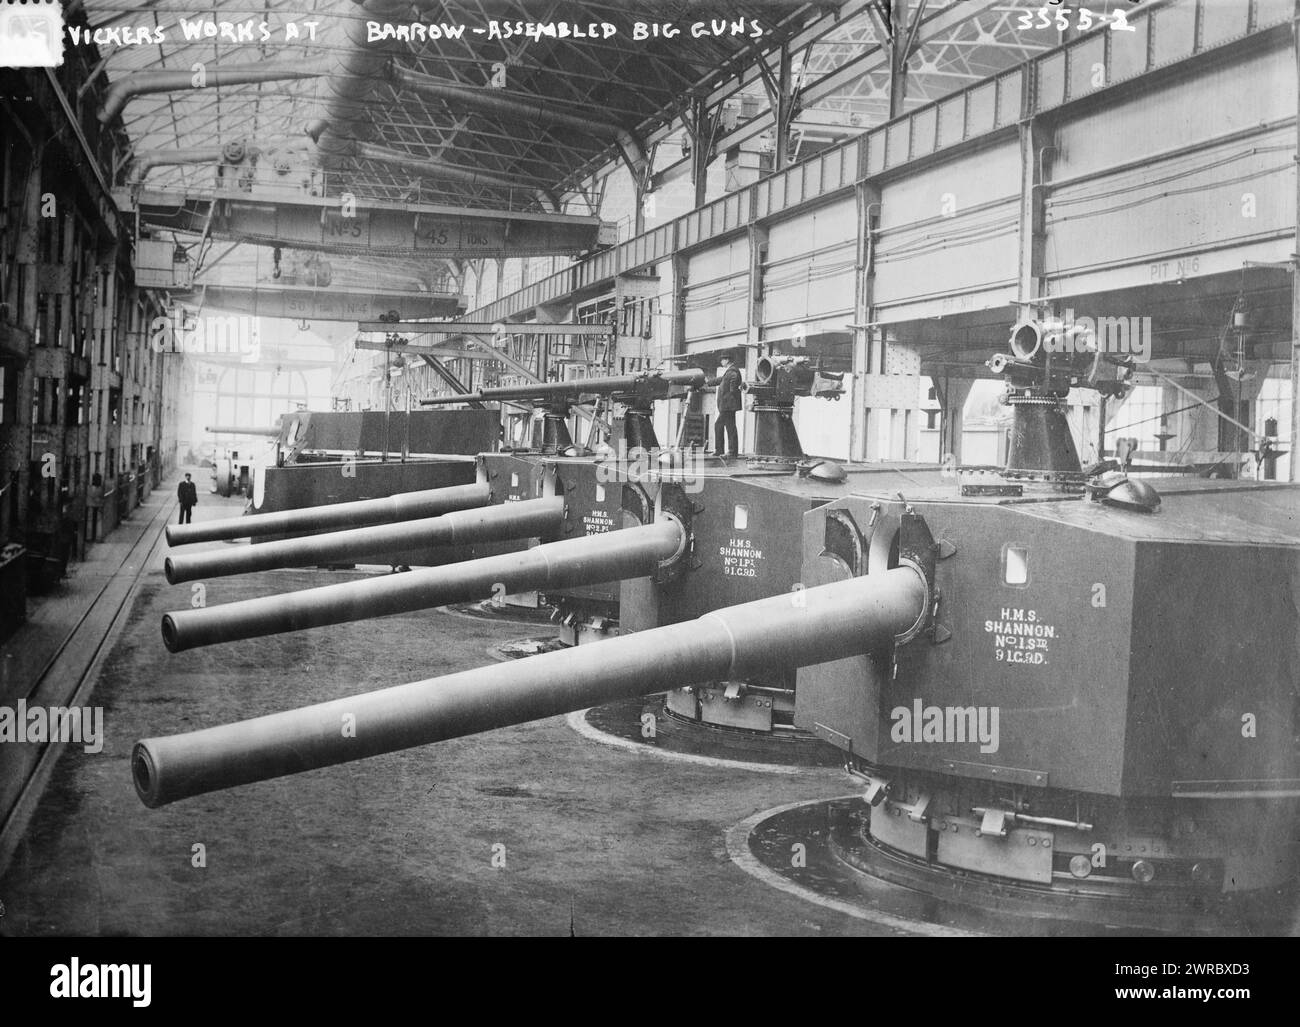 Vickers Works at Barrow, Assembled big guns, Photograph shows the Vickers, Sons and Maxim ordnance and ammunition factory at Barrow-in-Furness, England., 1915 Feb. 1, Glass negatives, 1 negative: glass Stock Photo